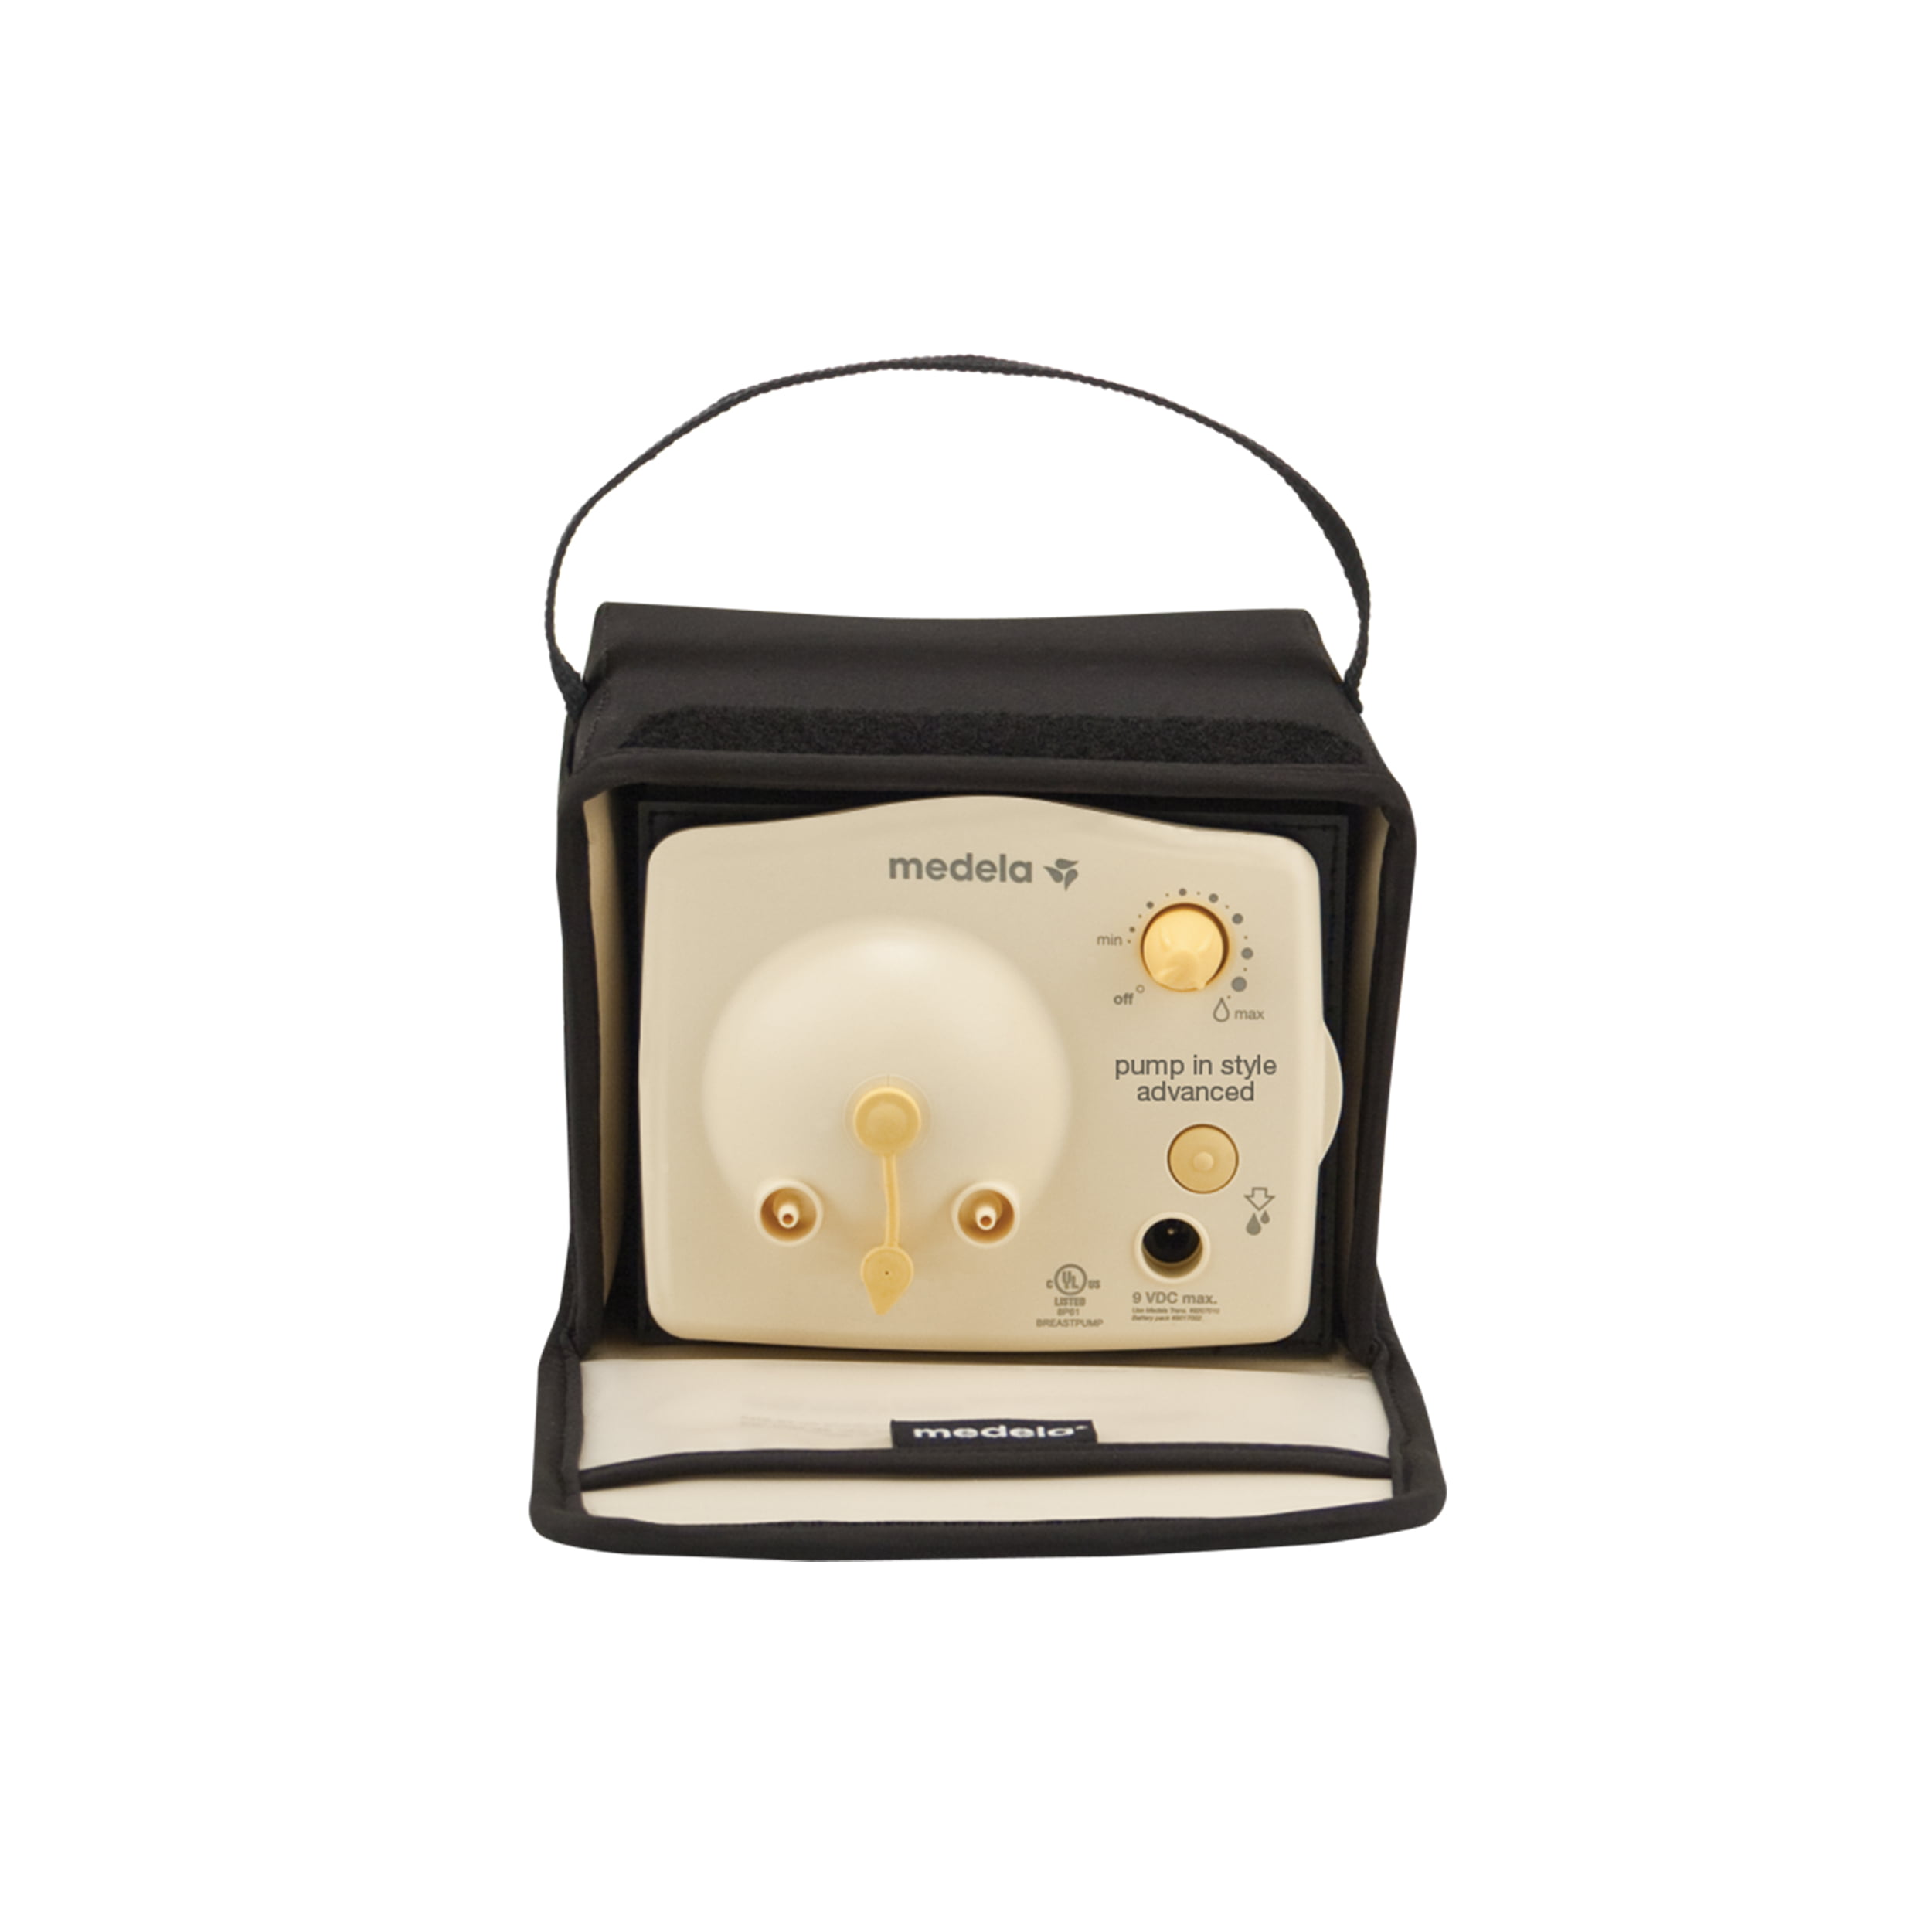 Medela Pump in Style Advanced Compact Double Breast Pump Works Great 